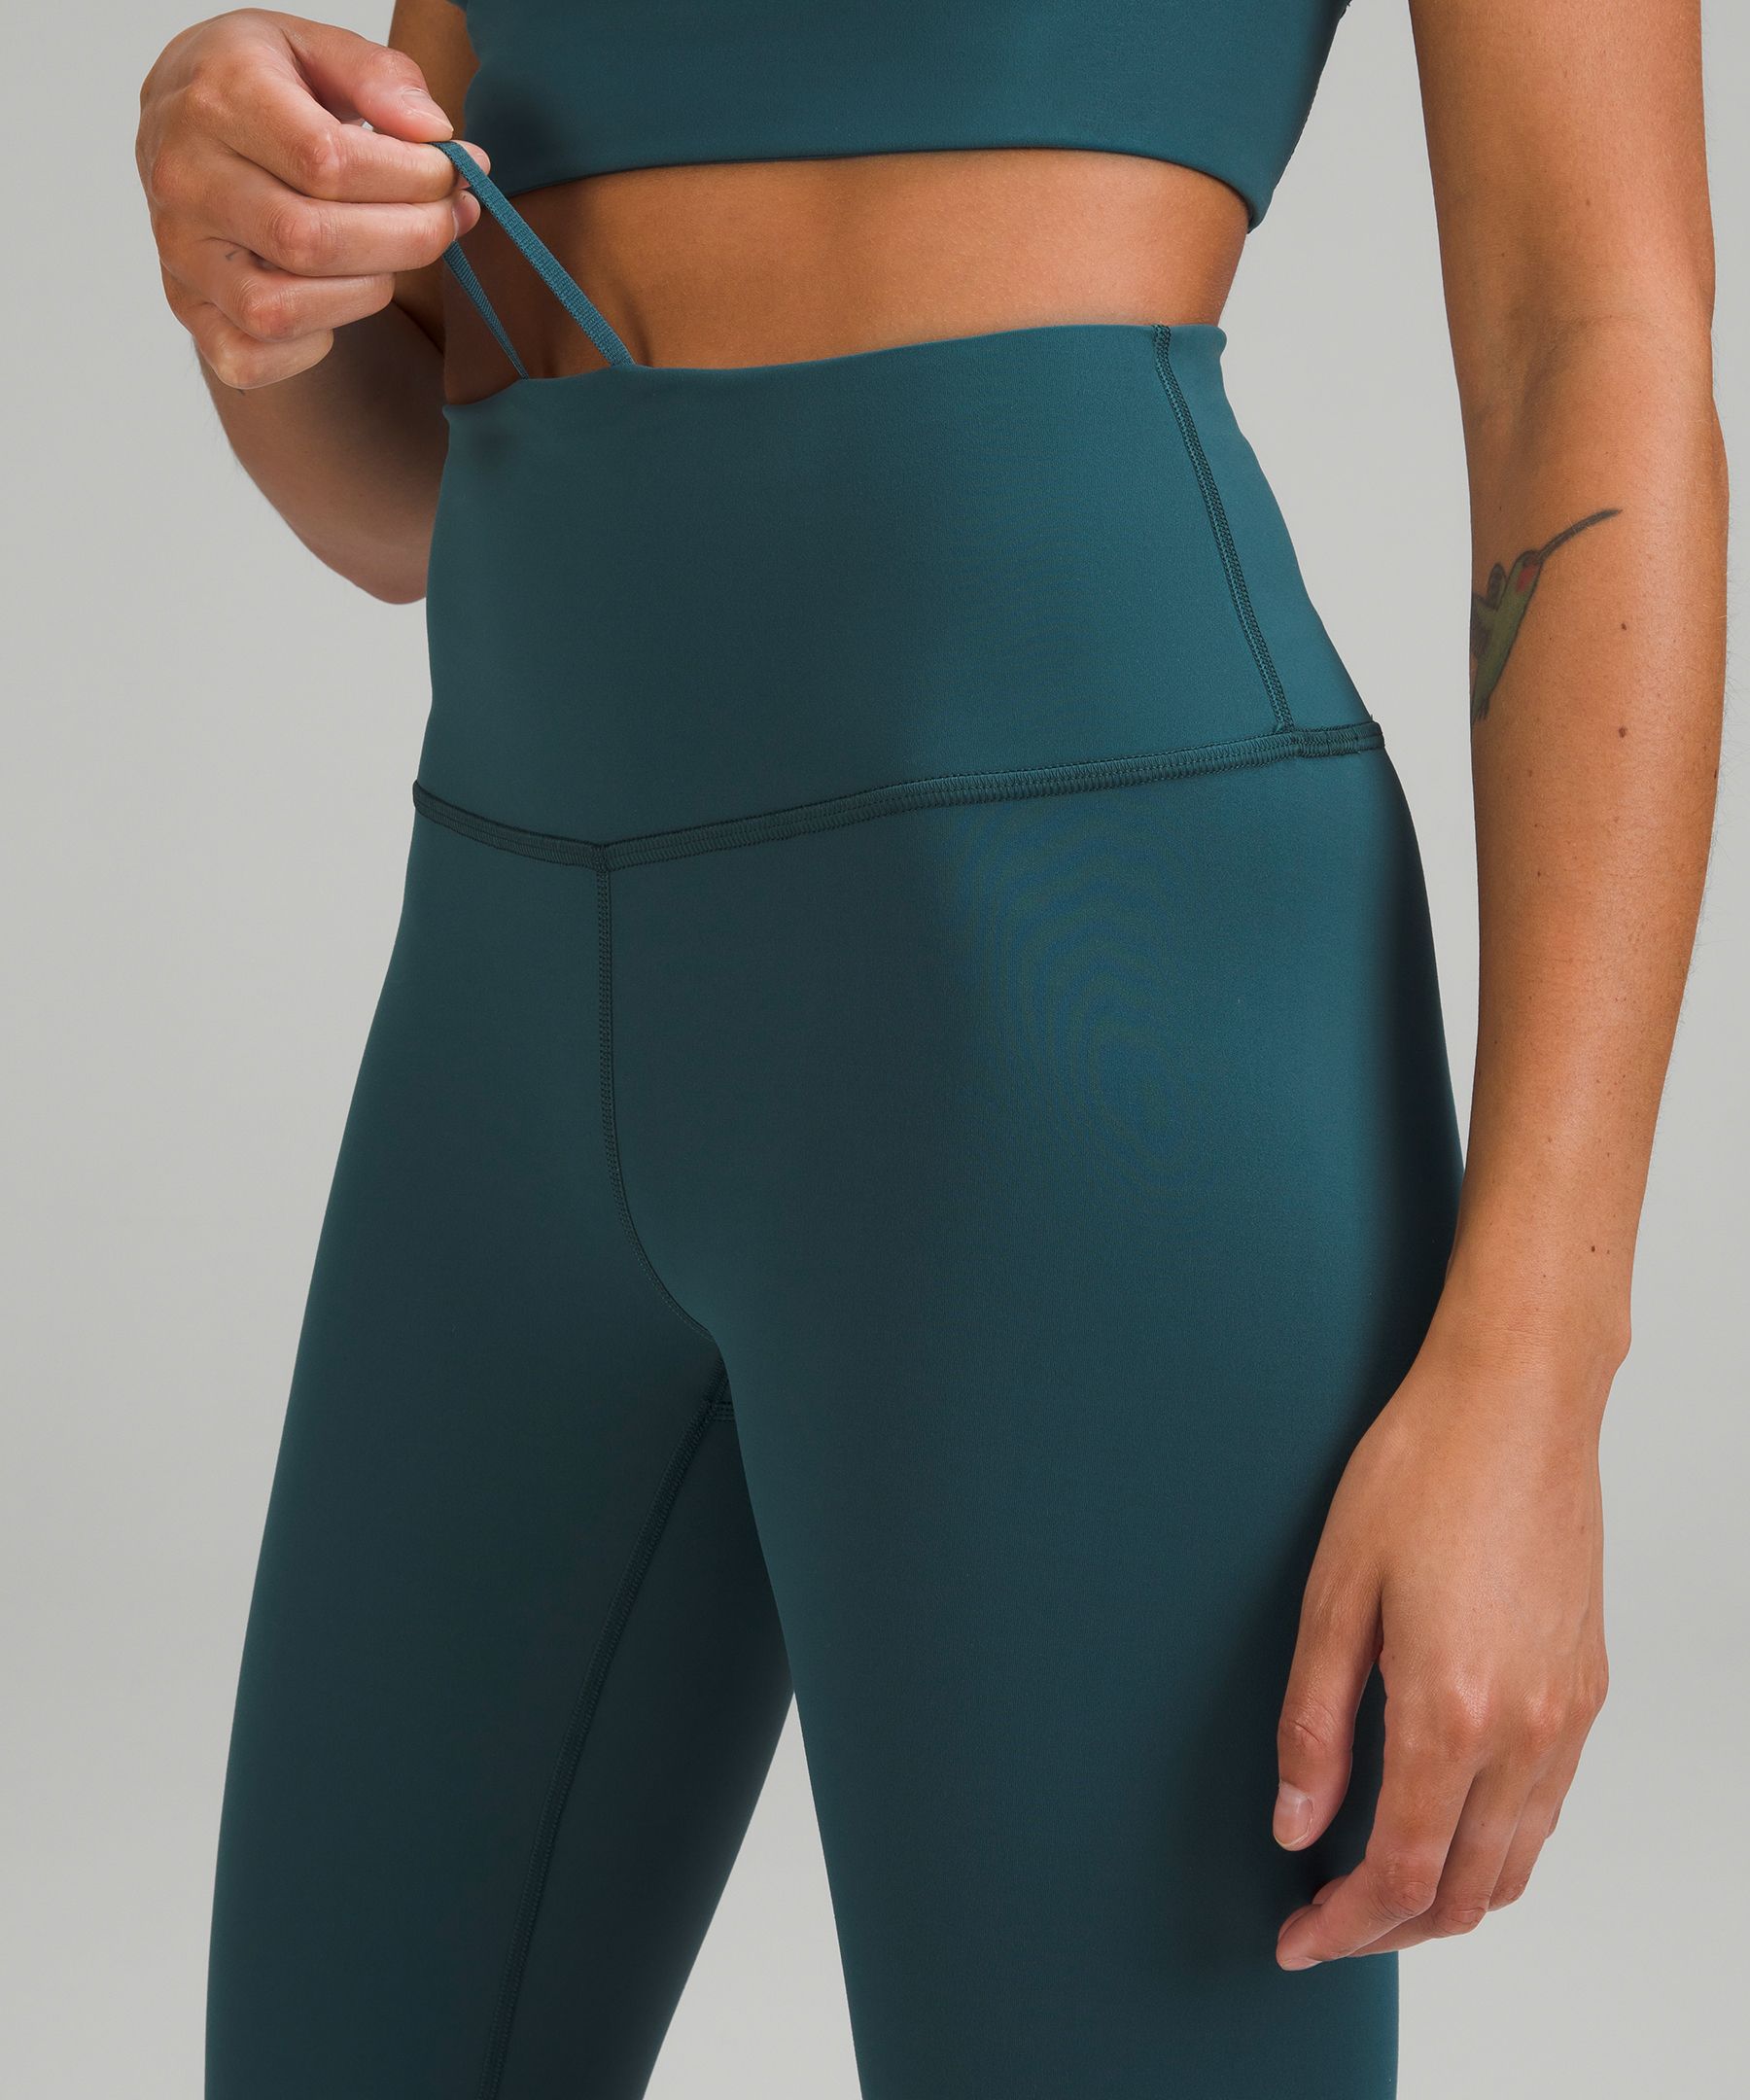 lululemon - The art of subtlety. Our classic Wunder Under Tights*Hi-Rise,  with a light ombre fade